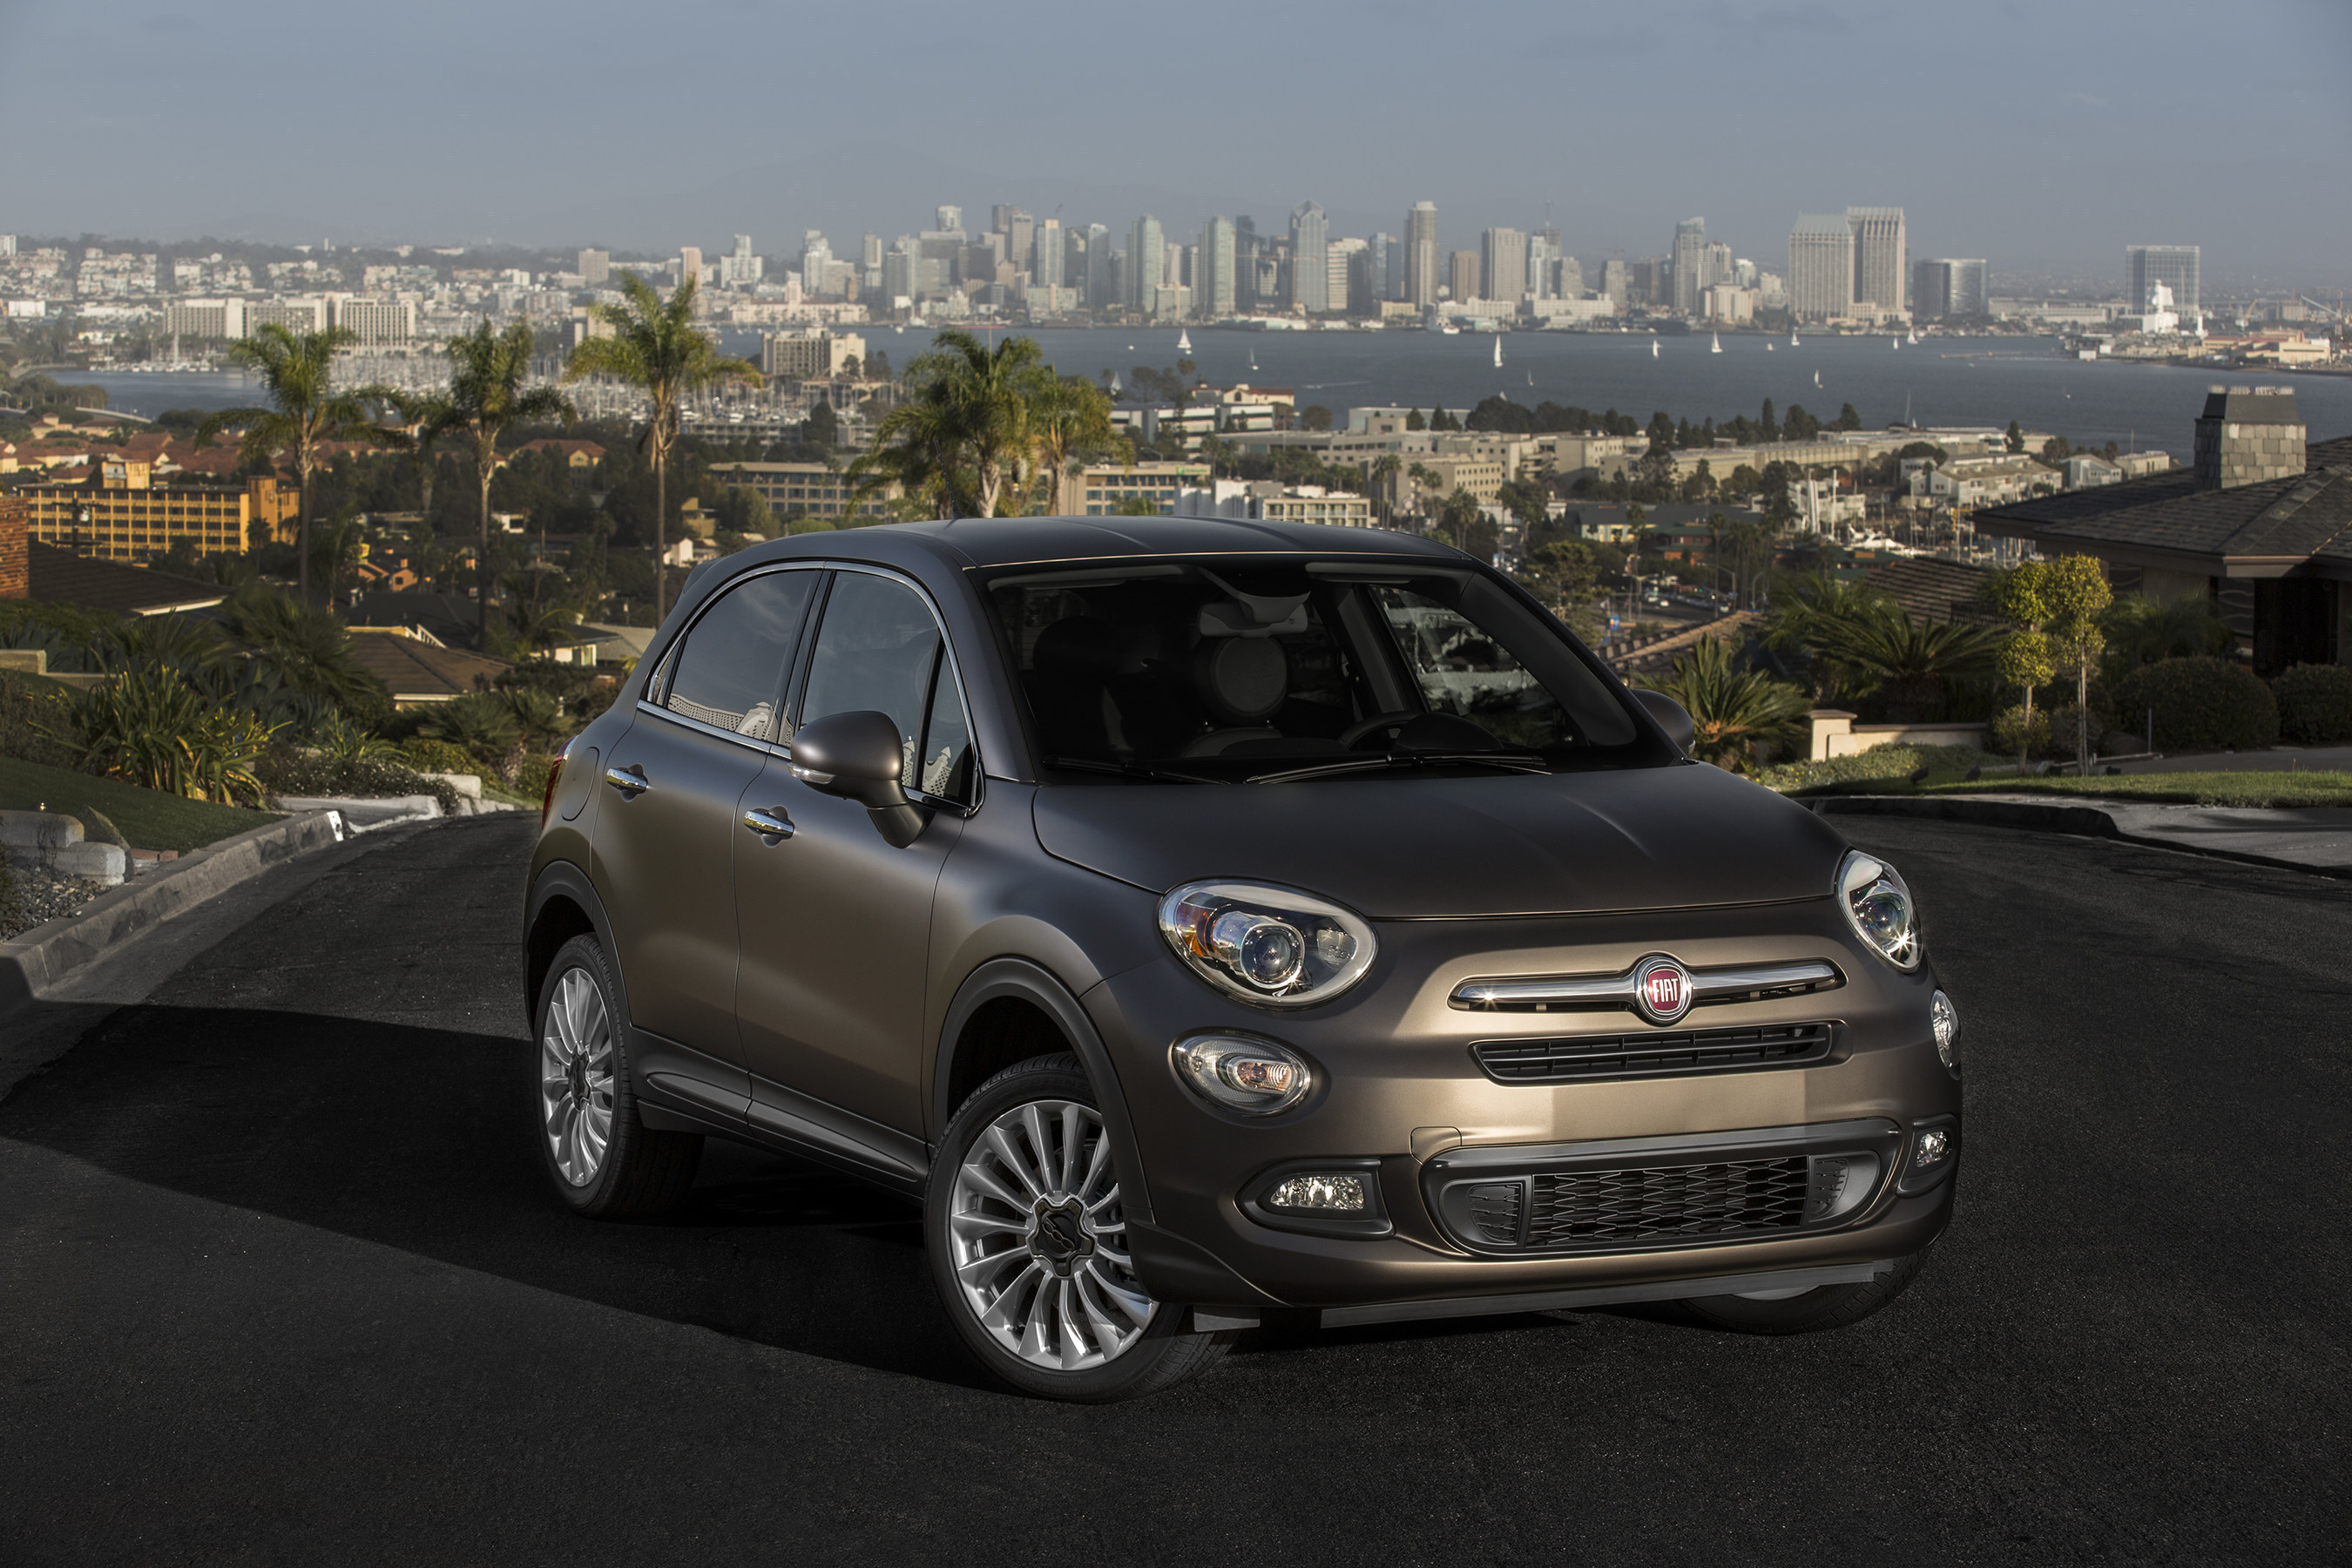 All-new 2016 Fiat 500X Lounge combines iconic Italian style with functionality, performance and all-wheel-drive confidence.